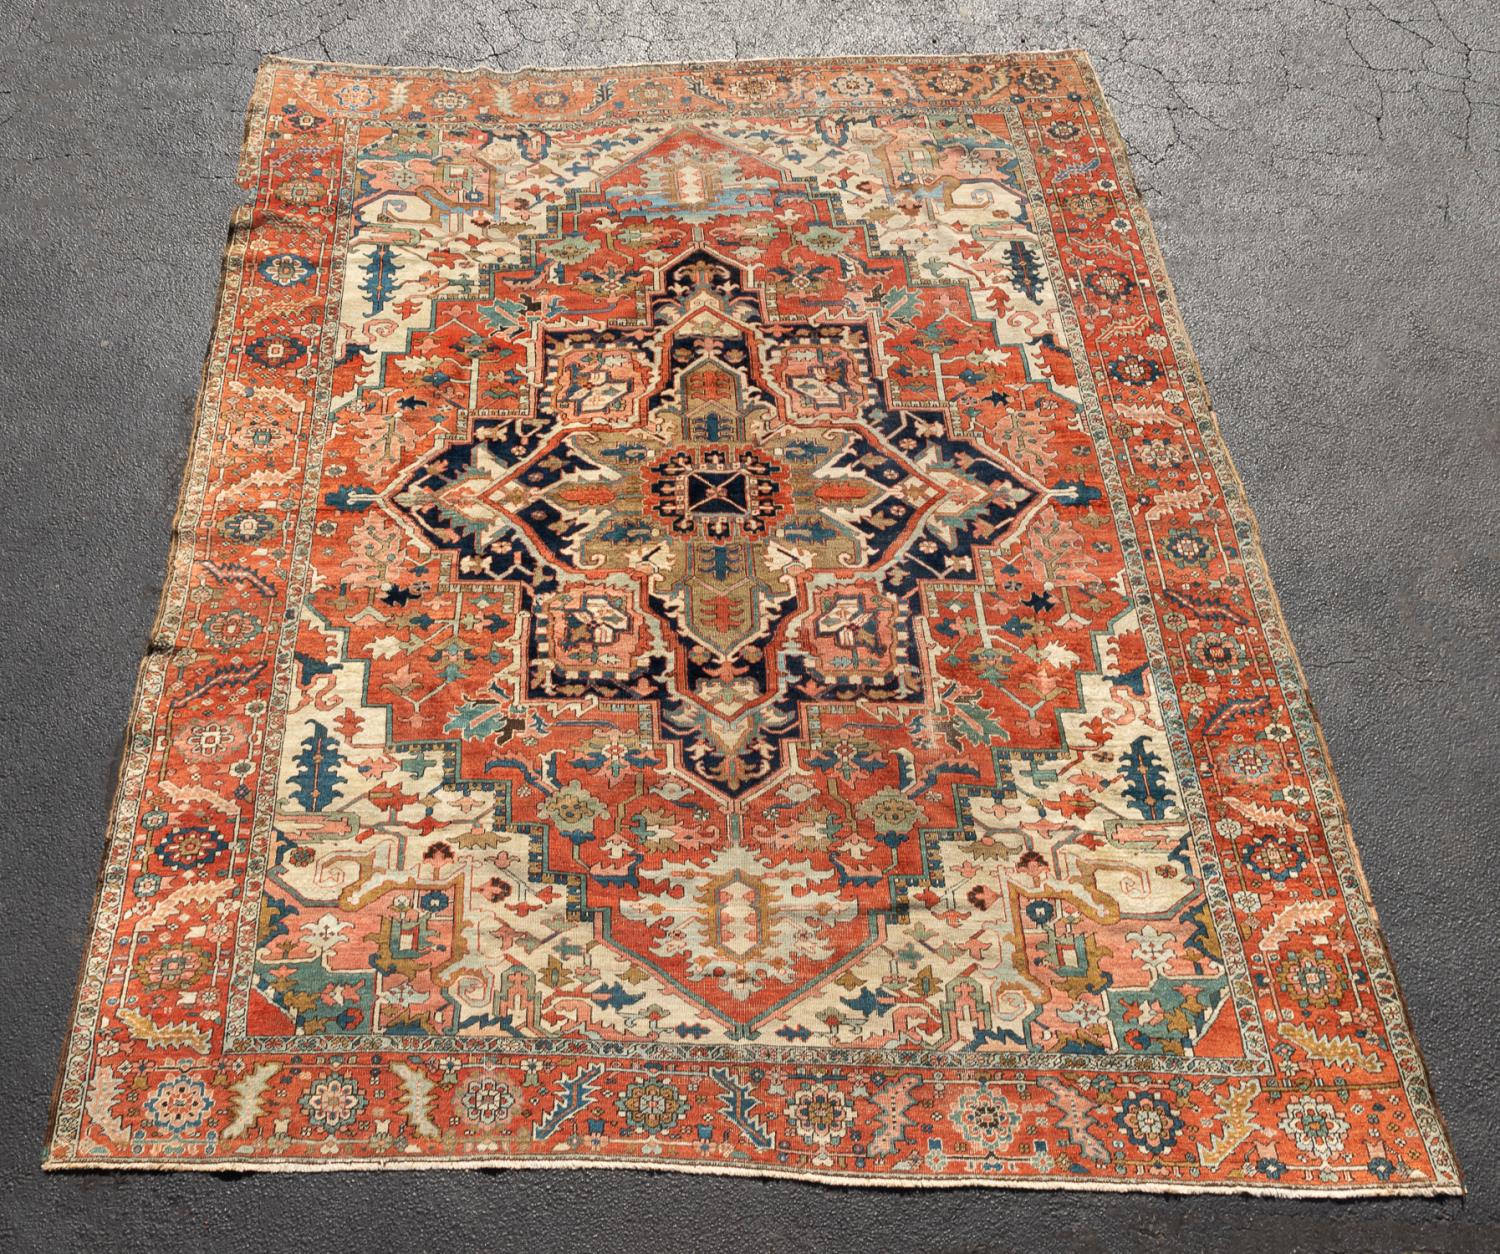 CA 1900 HAND KNOTTED WOOL PERSIAN